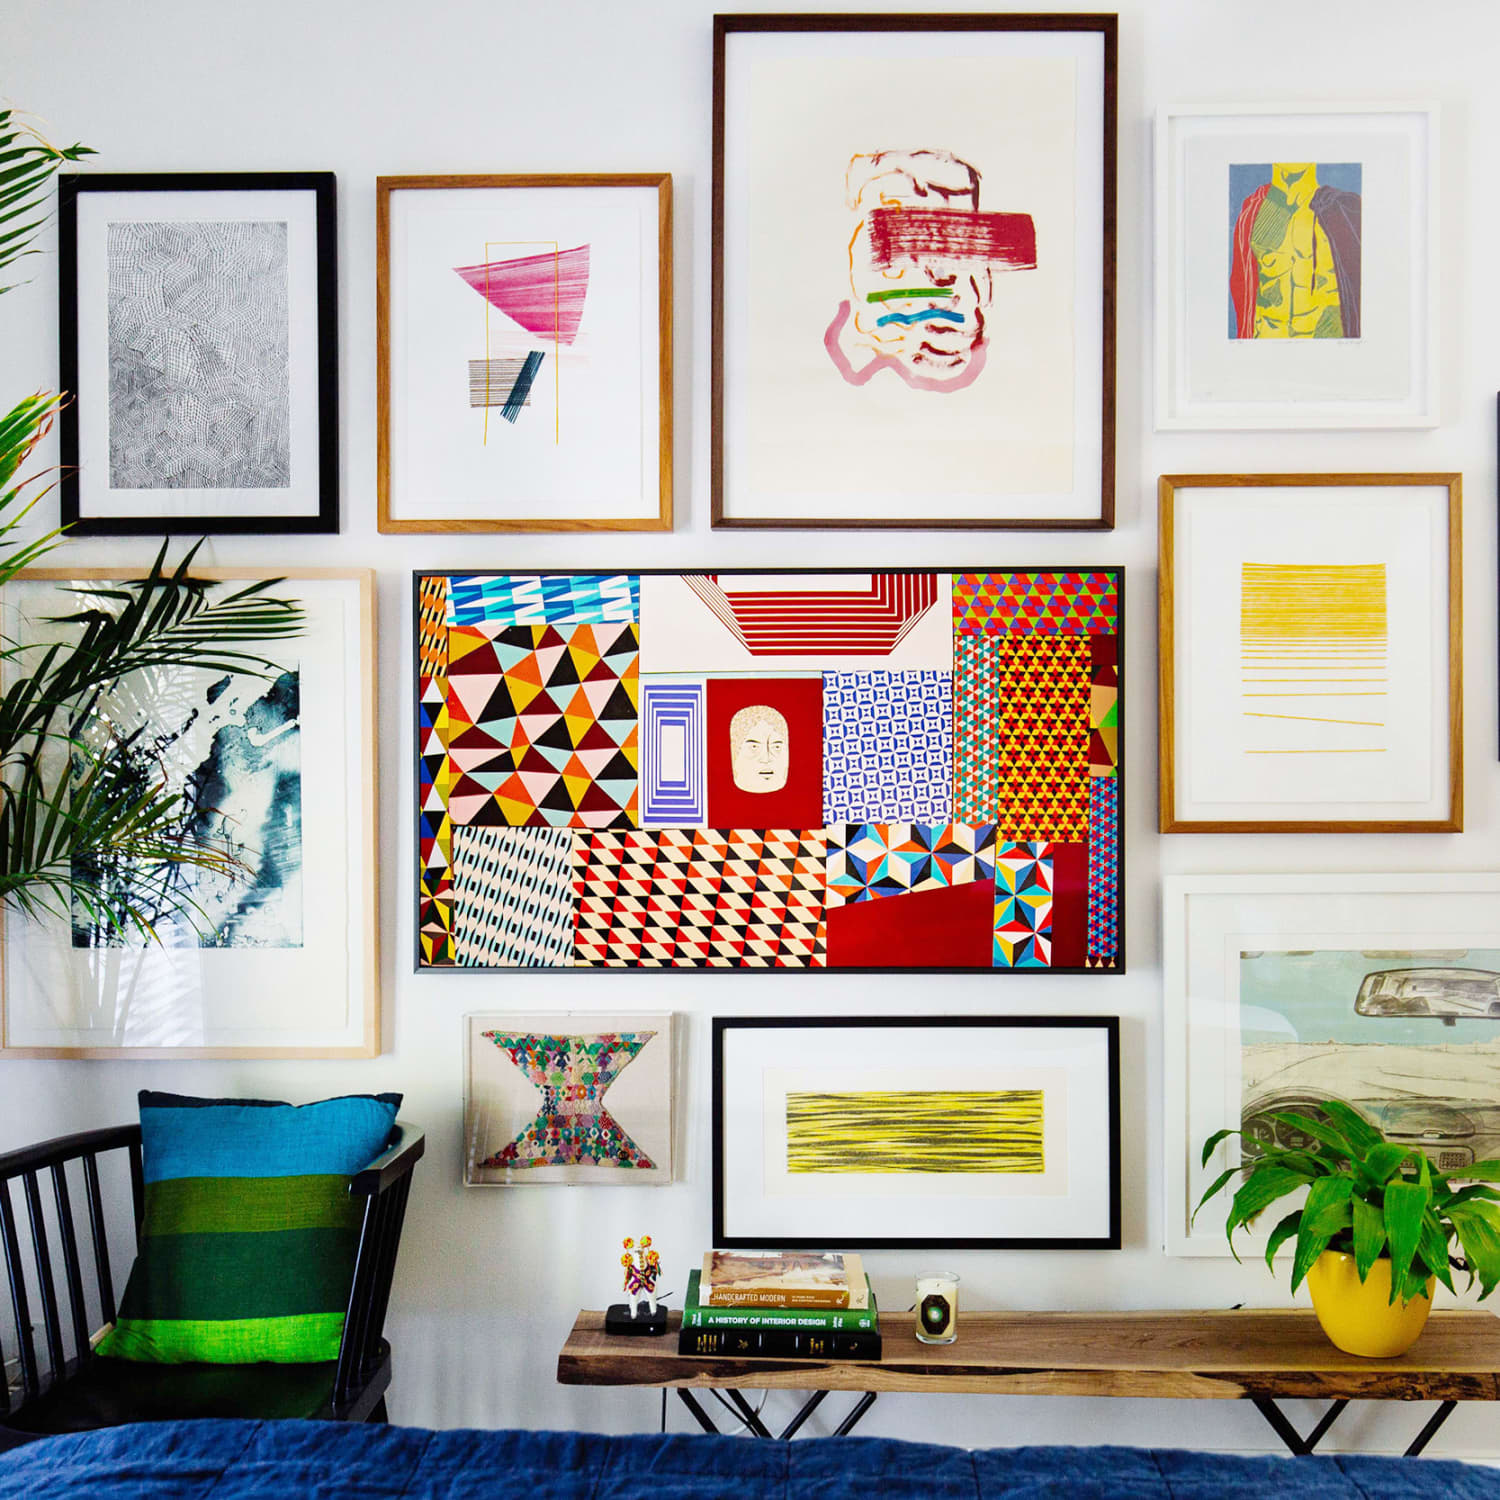 Choose Any 3 Prints and Make Your Own Set Custom Gallery Wall